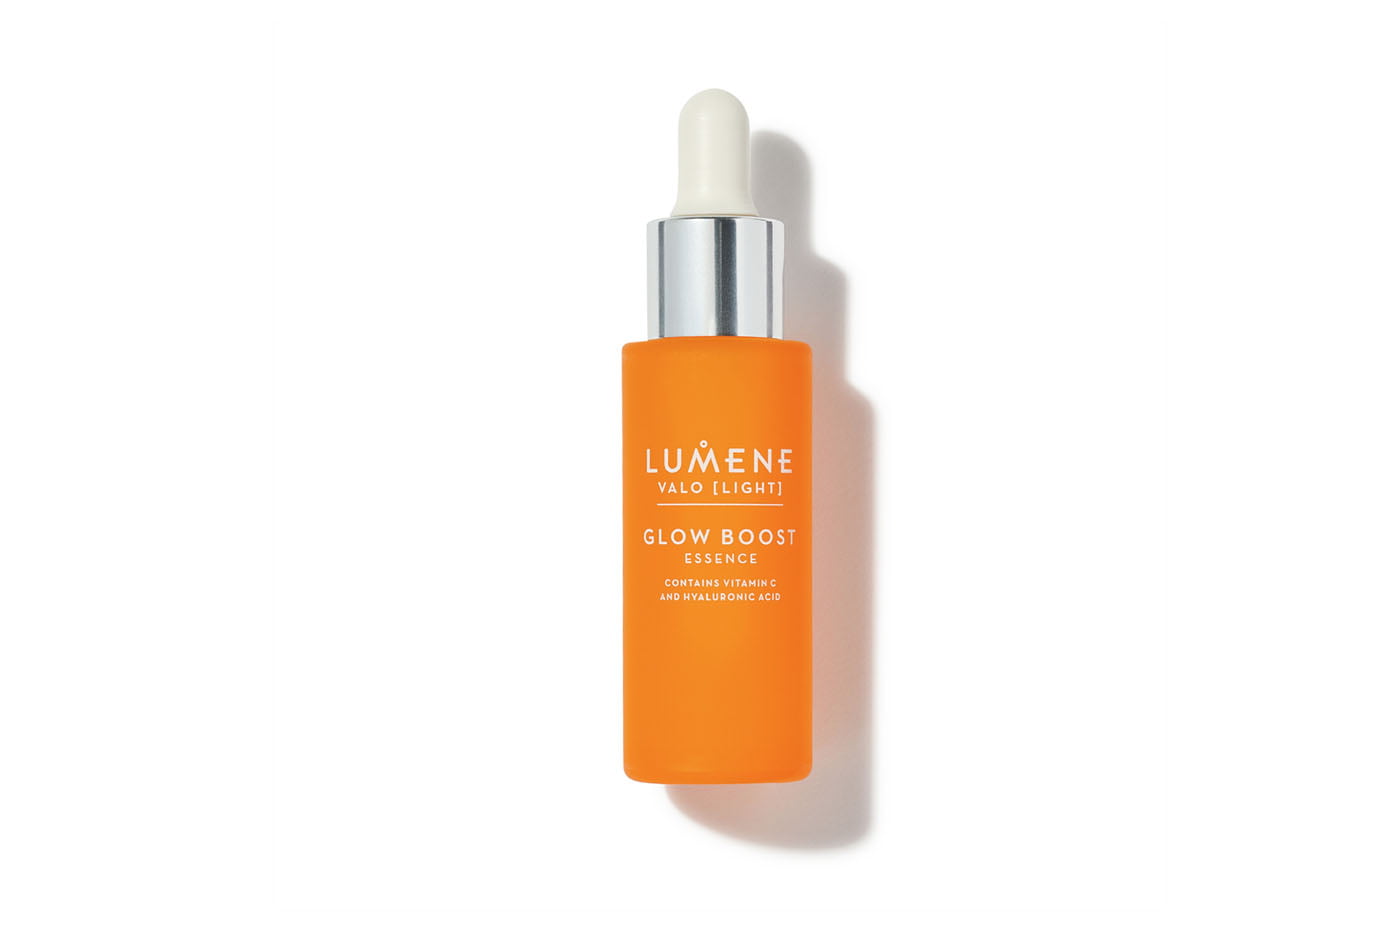 Review & Giveaway: Lumene Valo Vitamin C Glow Boost with Hyaluronic Acid - Vivre Le